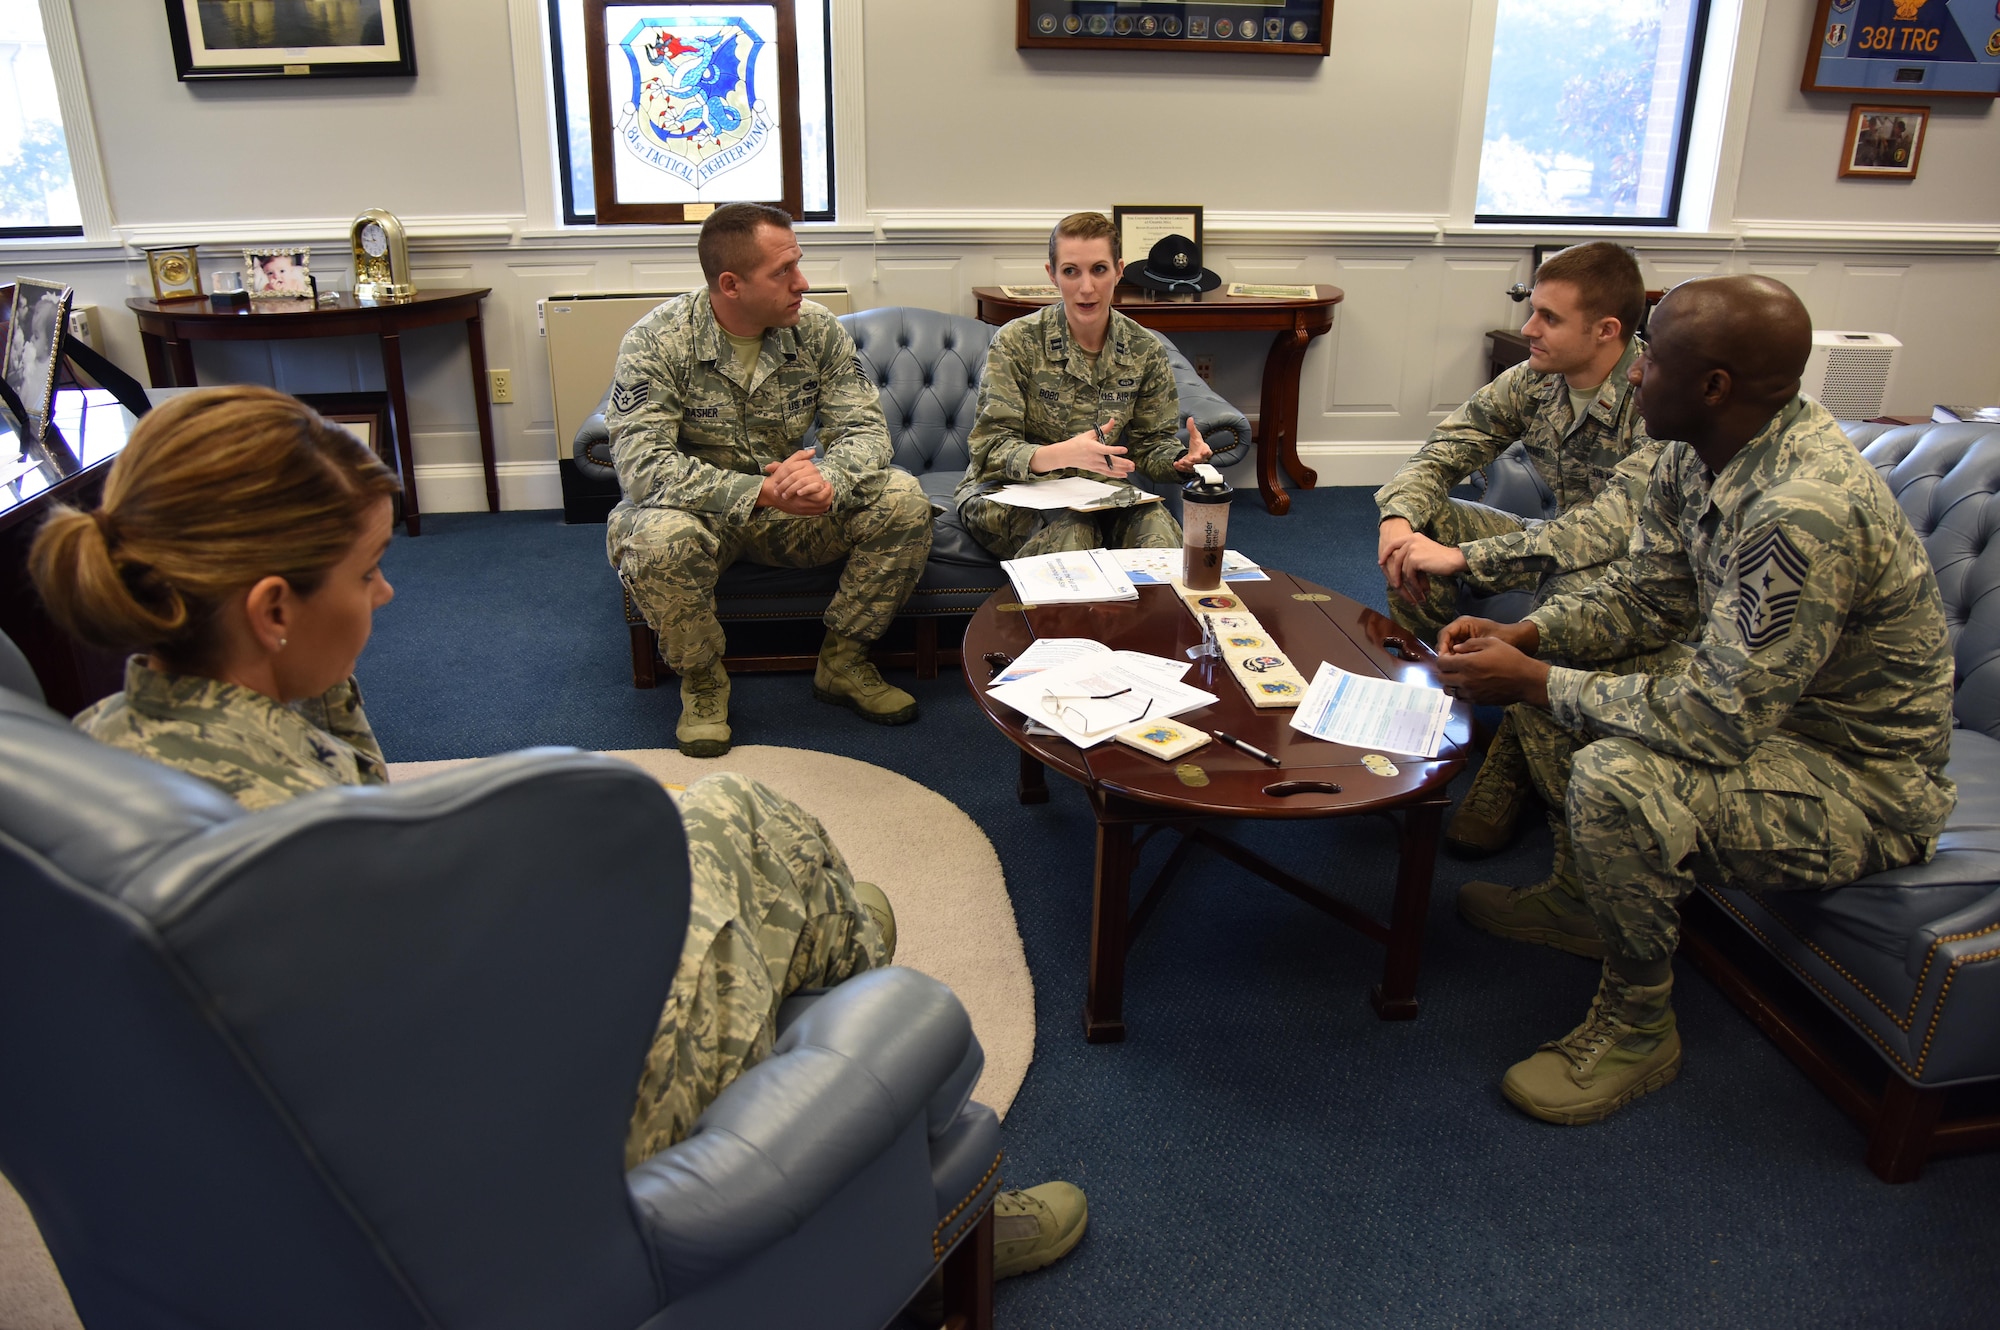 Staff Sgt. Eric Dasher, 335th Training Squadron precision measurement and equipment laboratory basic course instructor, attends a meeting with 81st Training Wing leadership at the 81st TRW headquarters building Nov. 1, 2016, on Keesler Air Force Base, Miss. Dasher participated in the new Command Chief for a Day program which highlights outstanding enlisted performers from around the wing. Each Airman selected for the program will spend the day shadowing Clark to learn what it takes to be a command chief. (U.S. Air Force photo by Kemberly Groue/Released)